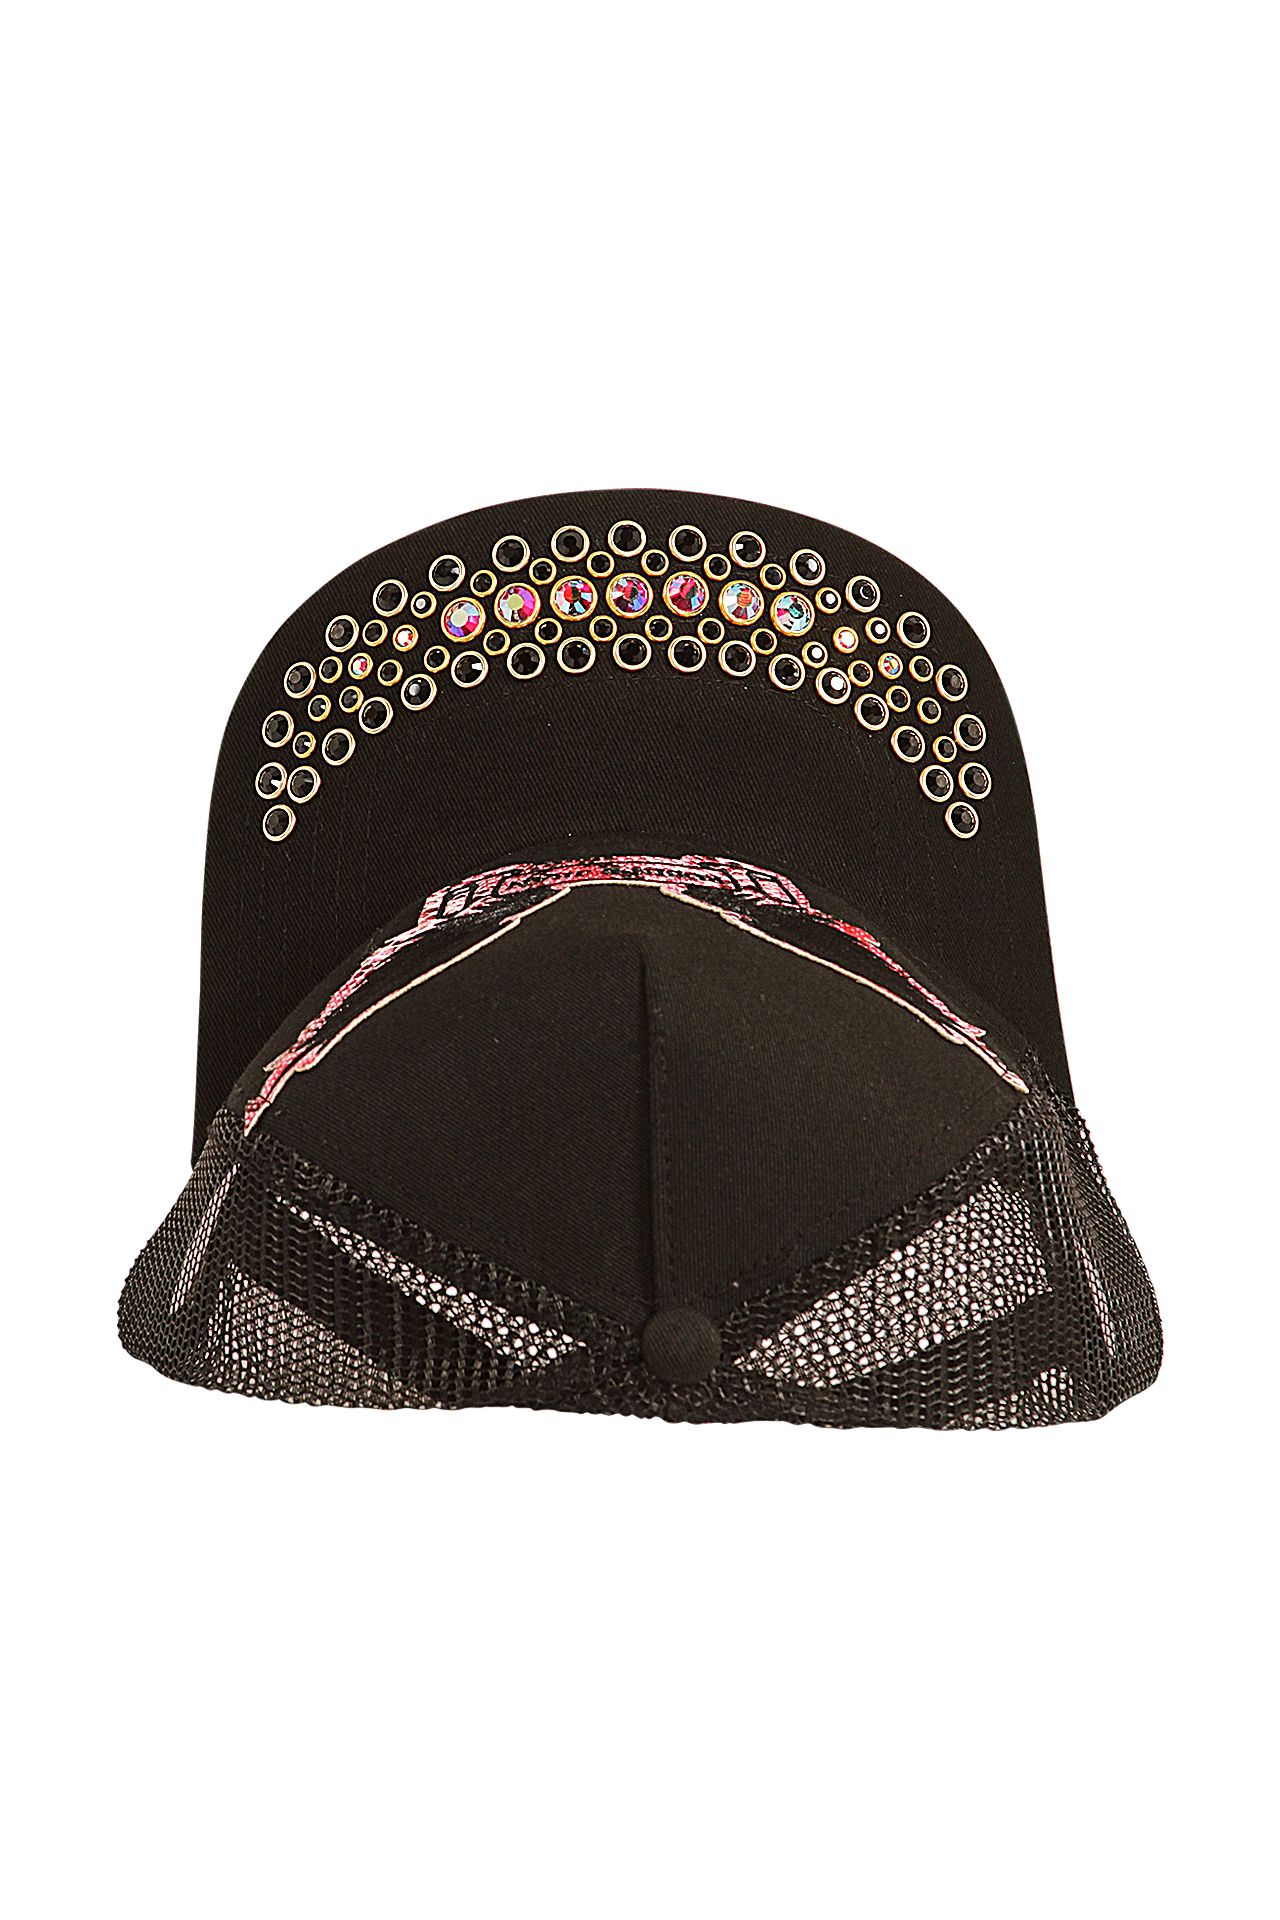 BLACK TRUCKER IN HOT PINK VIPER WITH BLACK & RED CRYSTALS